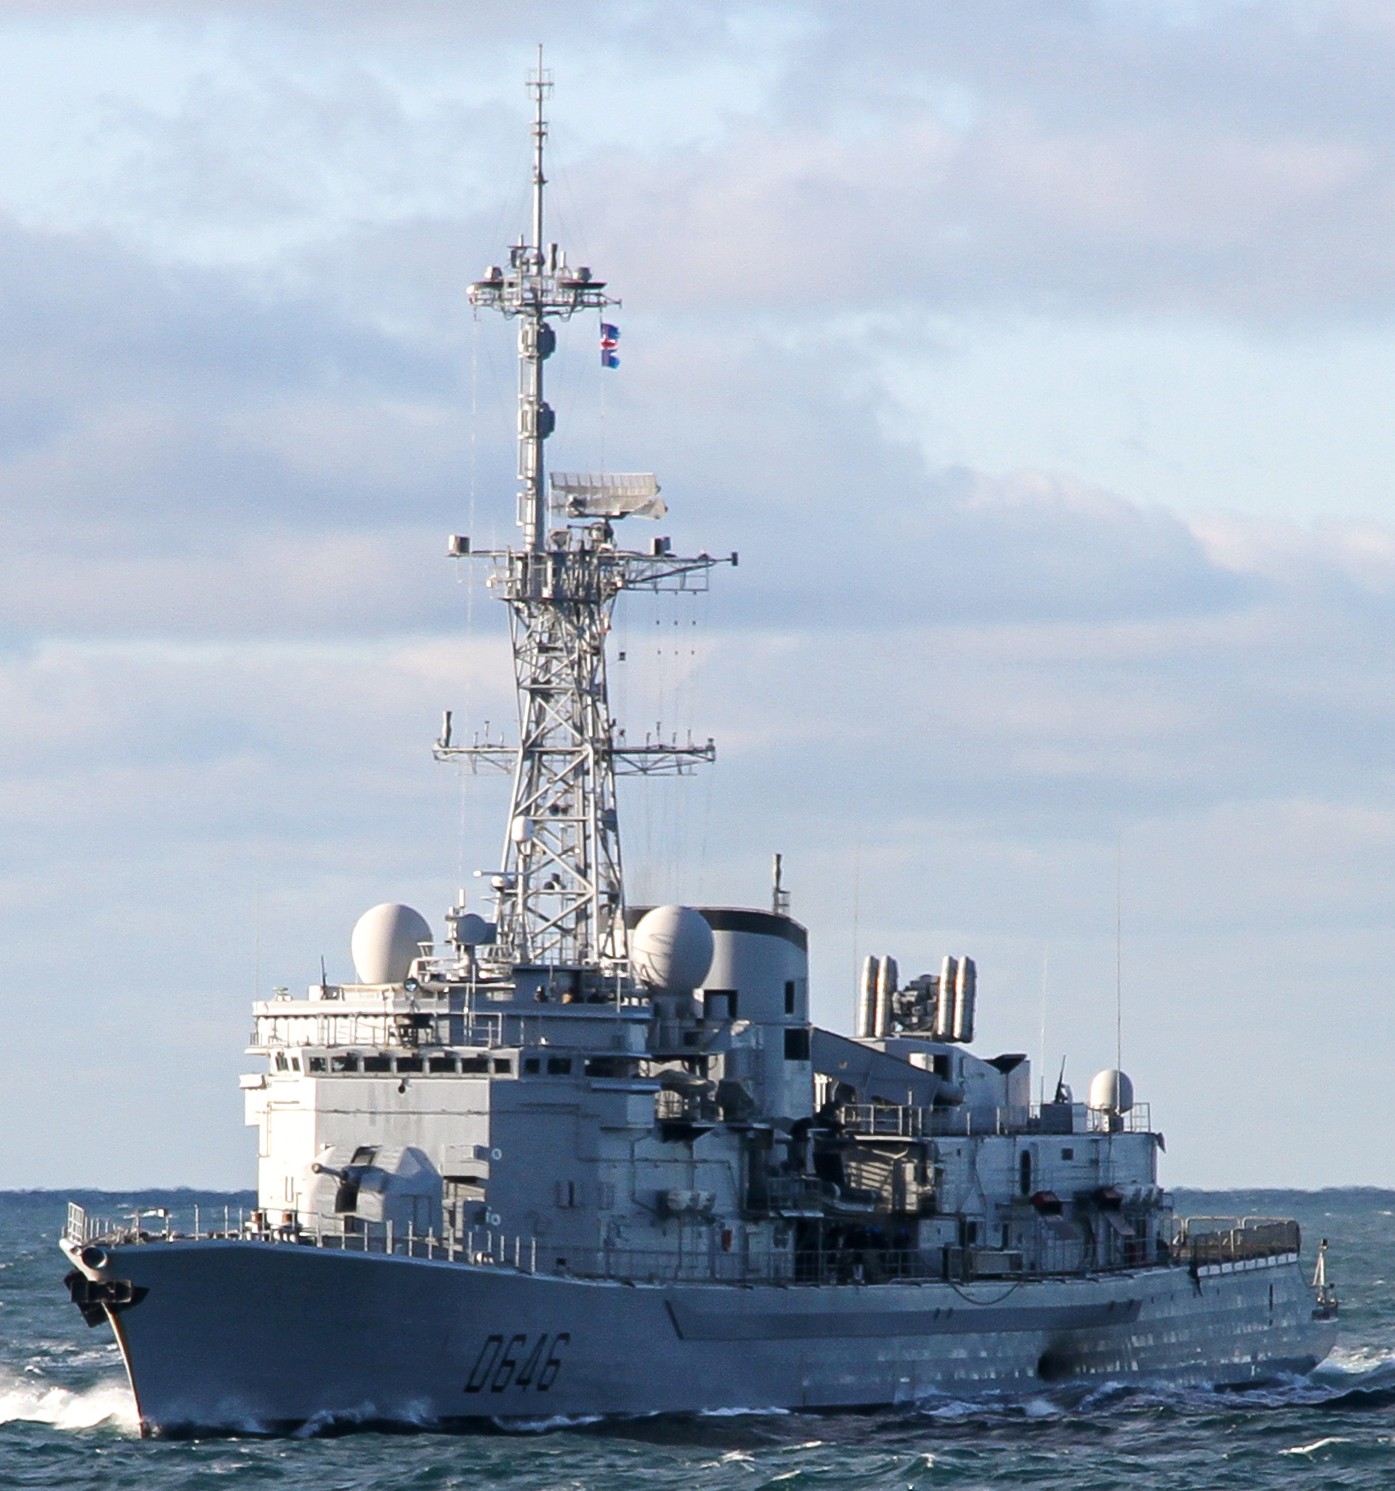 d-646 fs latouche treville f70as frigate destroyer asw french navy marine nationale 33